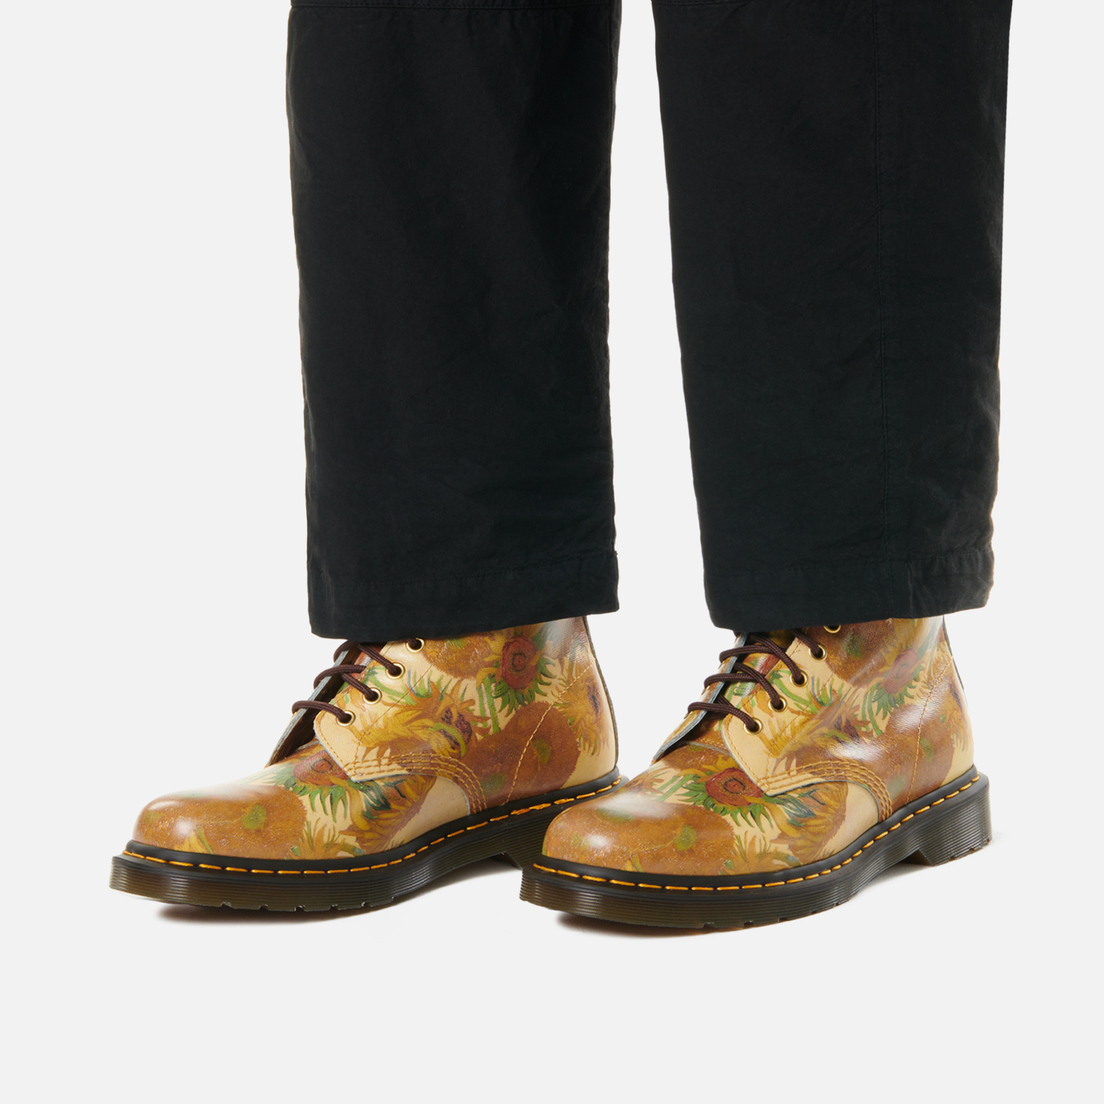 Dr. Martens Ботинки x The National Gallery 1460 Sunflowers Leather